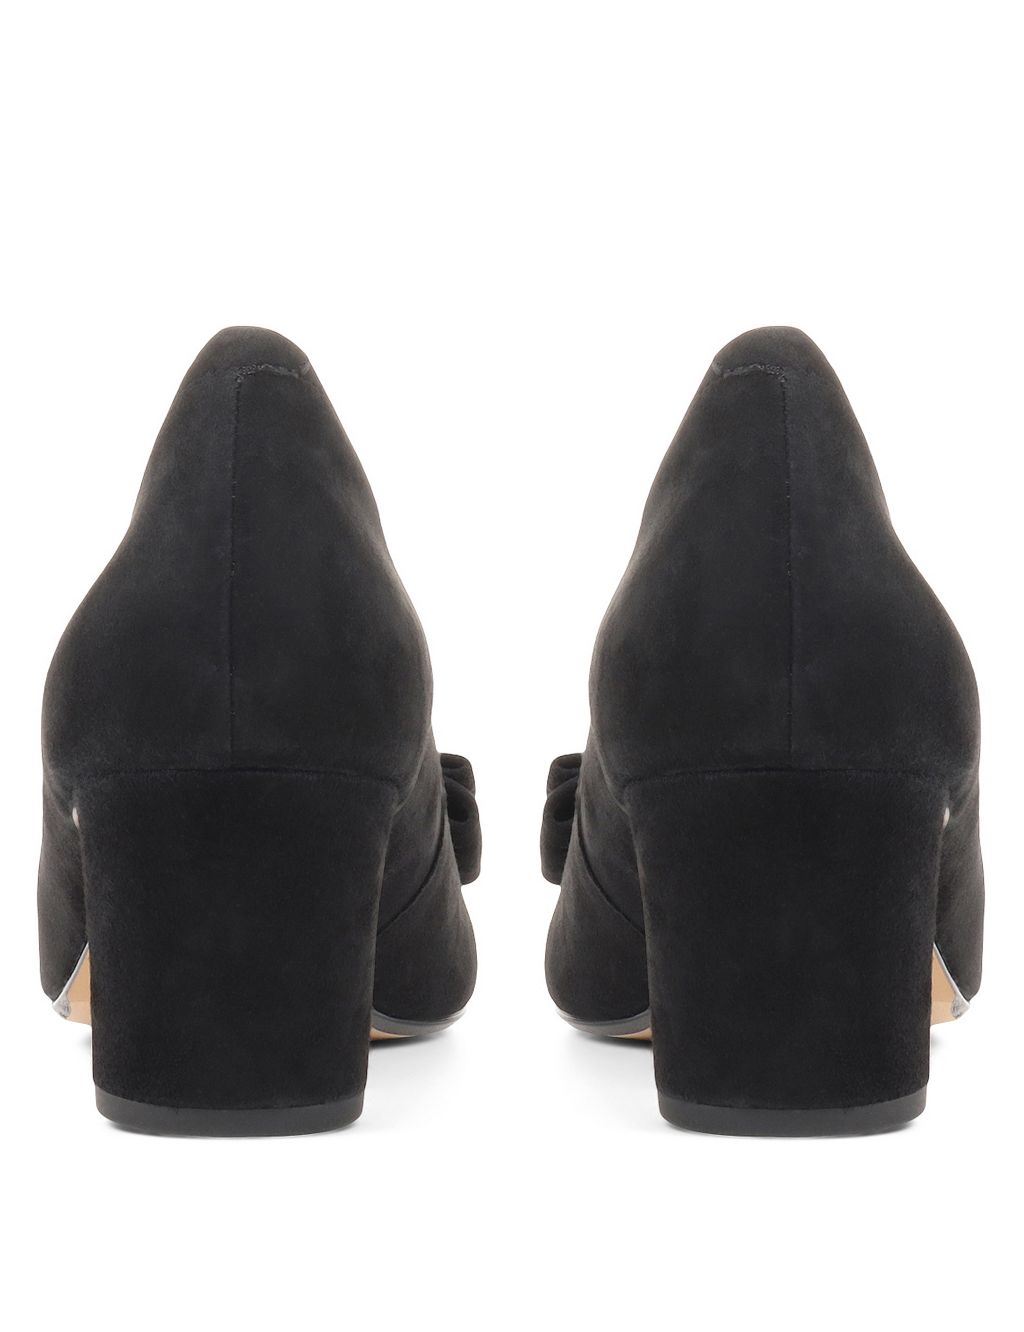 Suede Bow Block Heel Court Shoes image 3